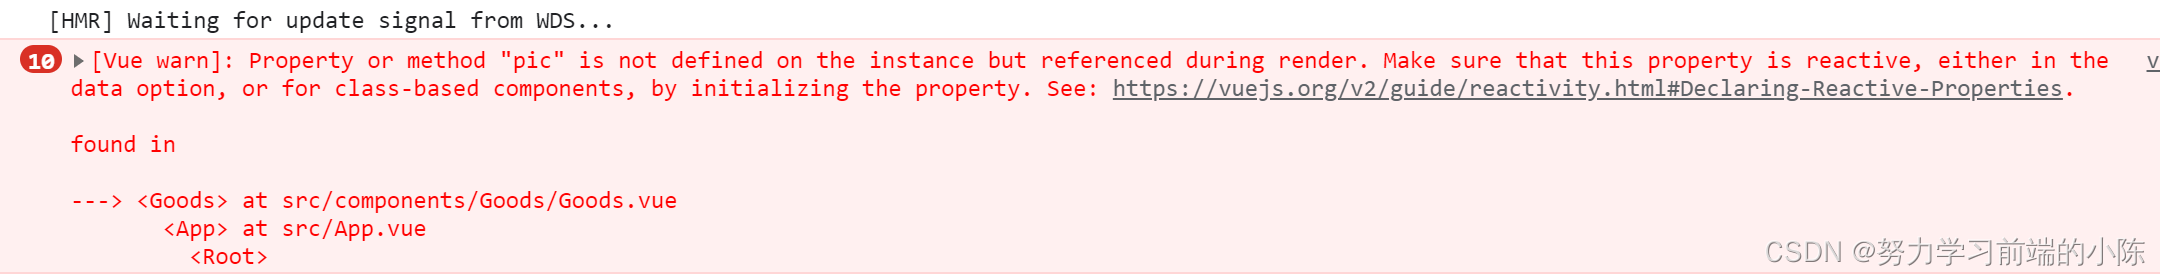 “Property or method “***“ is not defined on the instance but referenced during render.”报错的原因及解决方案